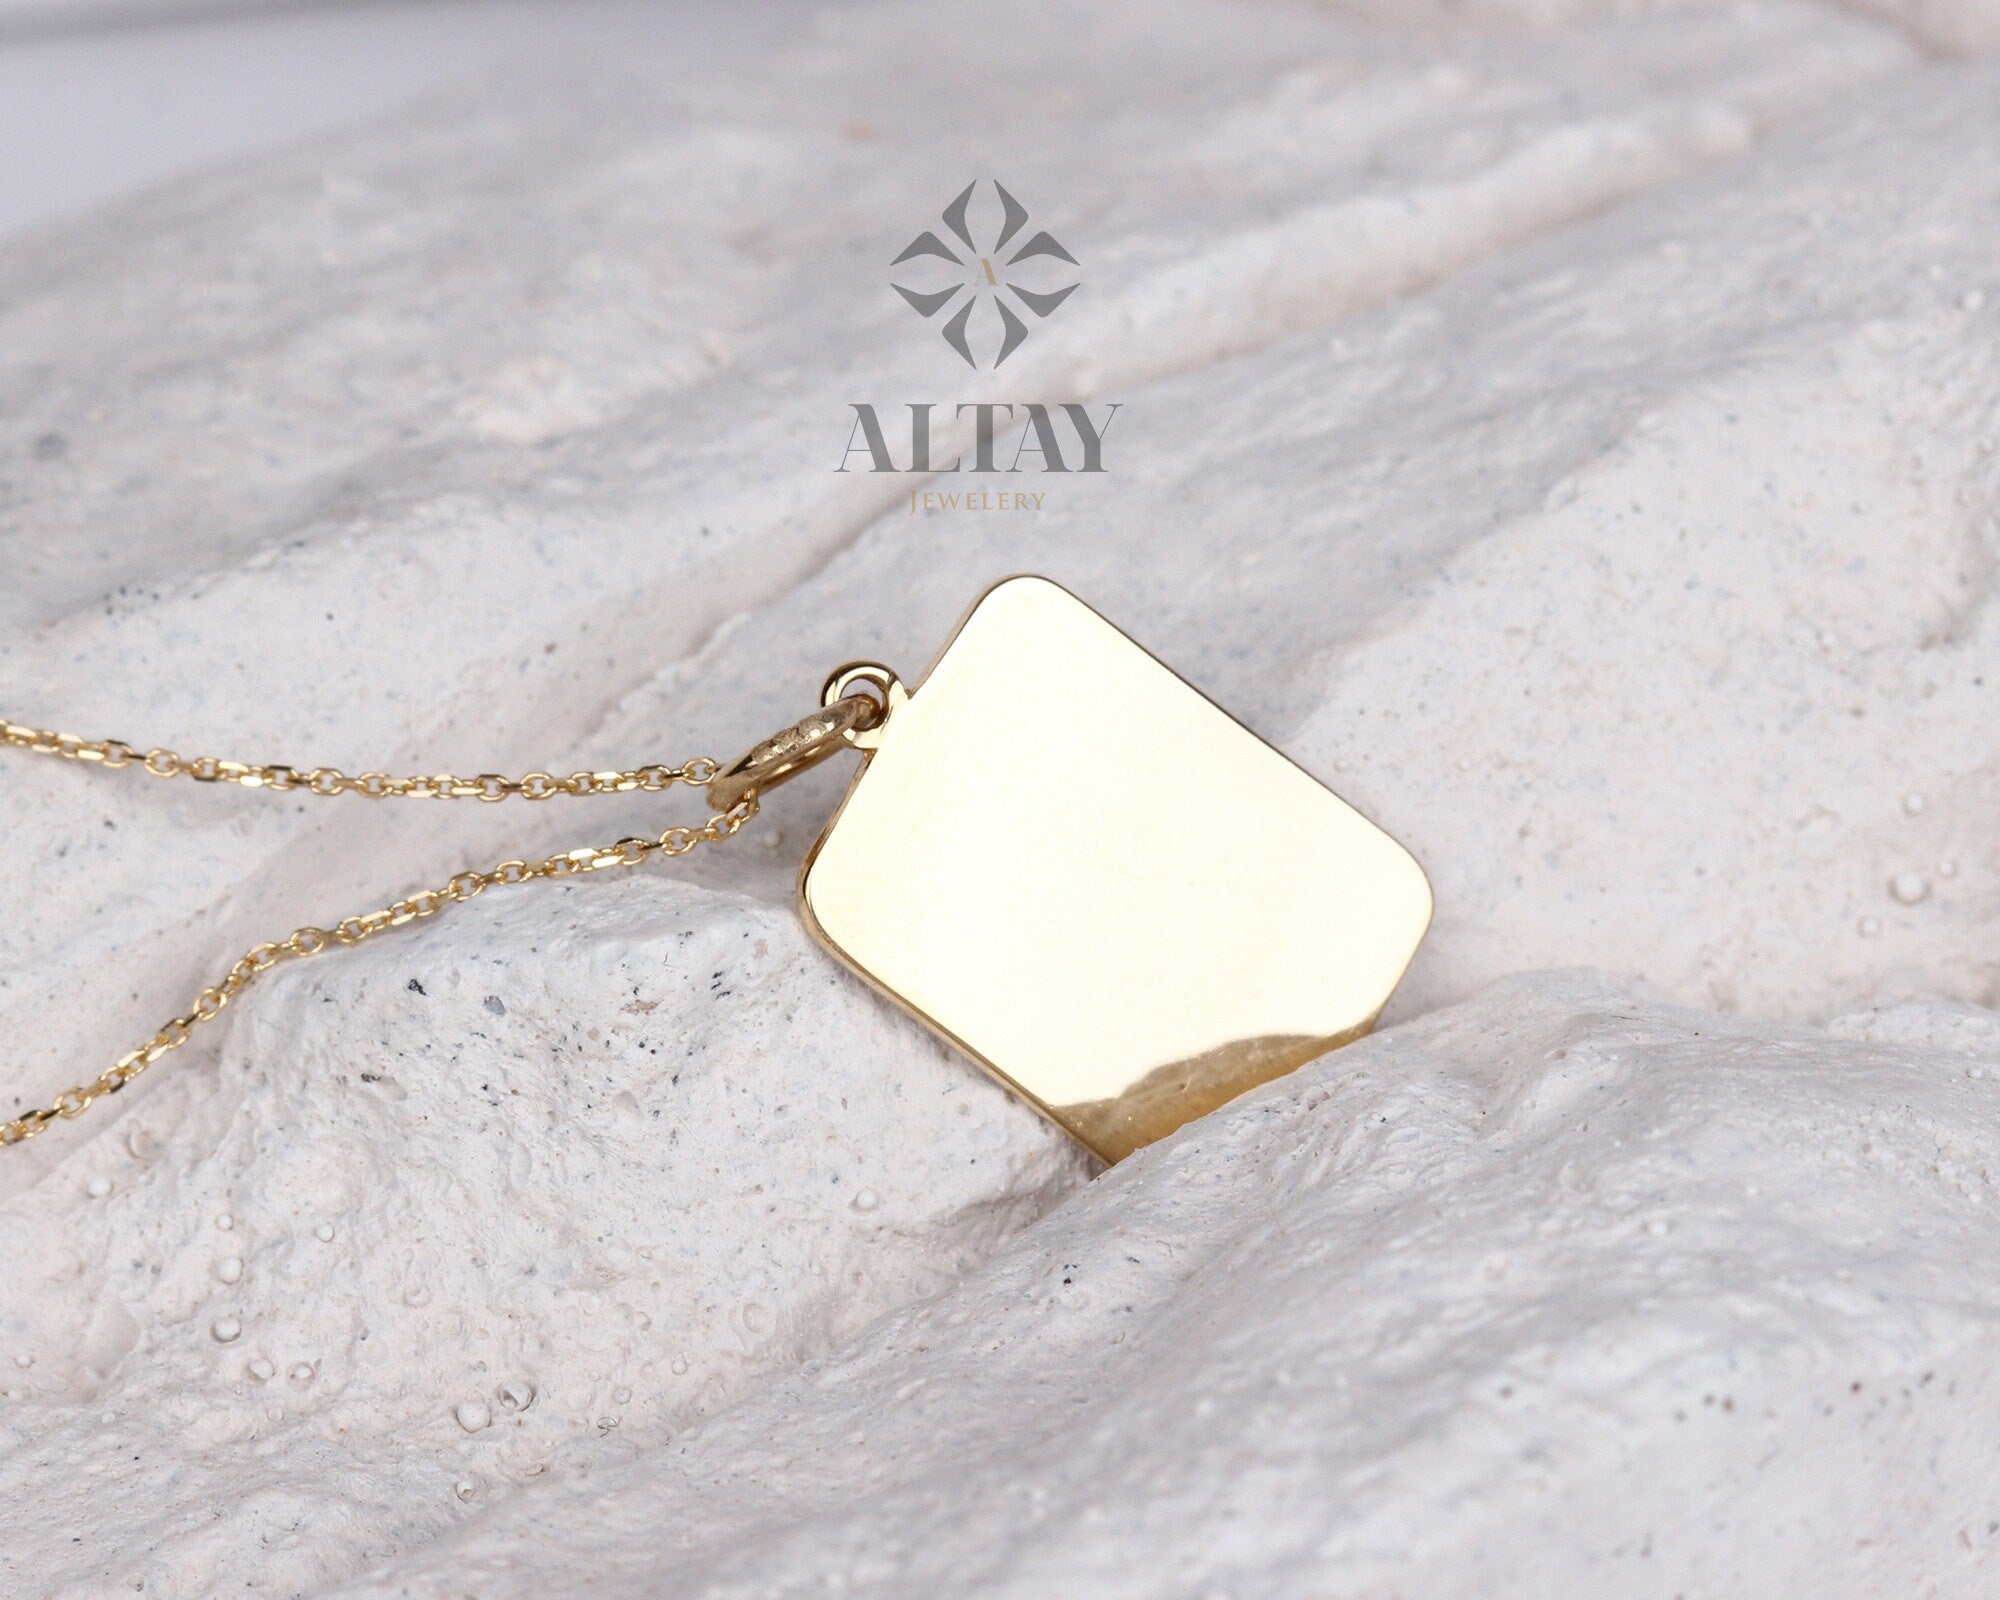 14K Gold Rectangle ID Necklace, Personalized Initial Choker, Custom Name Charm, Medical ID Necklace, Engraved Date Pendant, Gift For Her